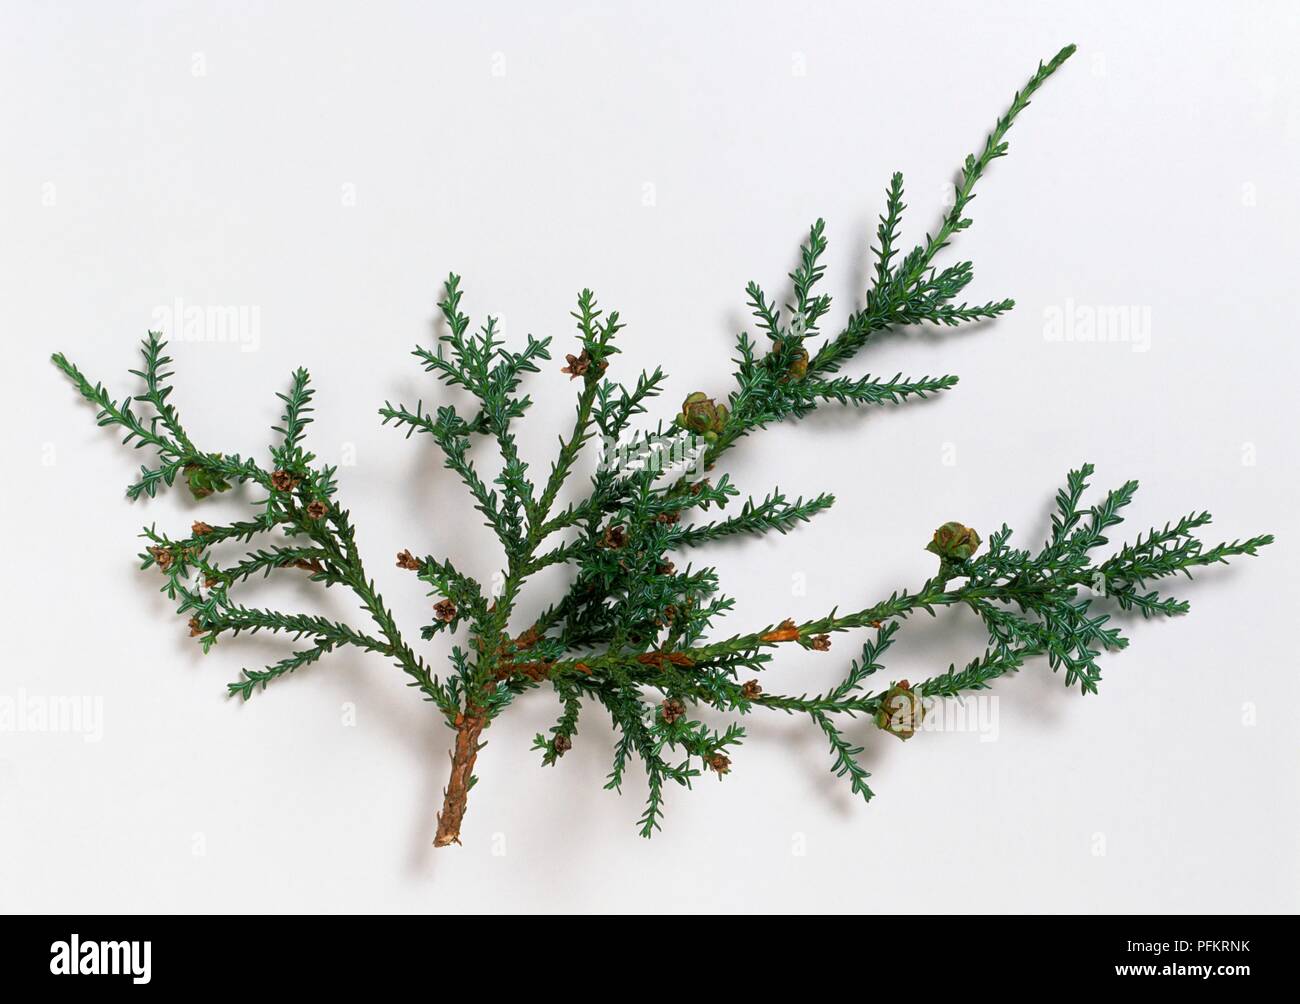 Fitzroya cupressoides (Patagonian cypress), twig with green leaves and cones Stock Photo